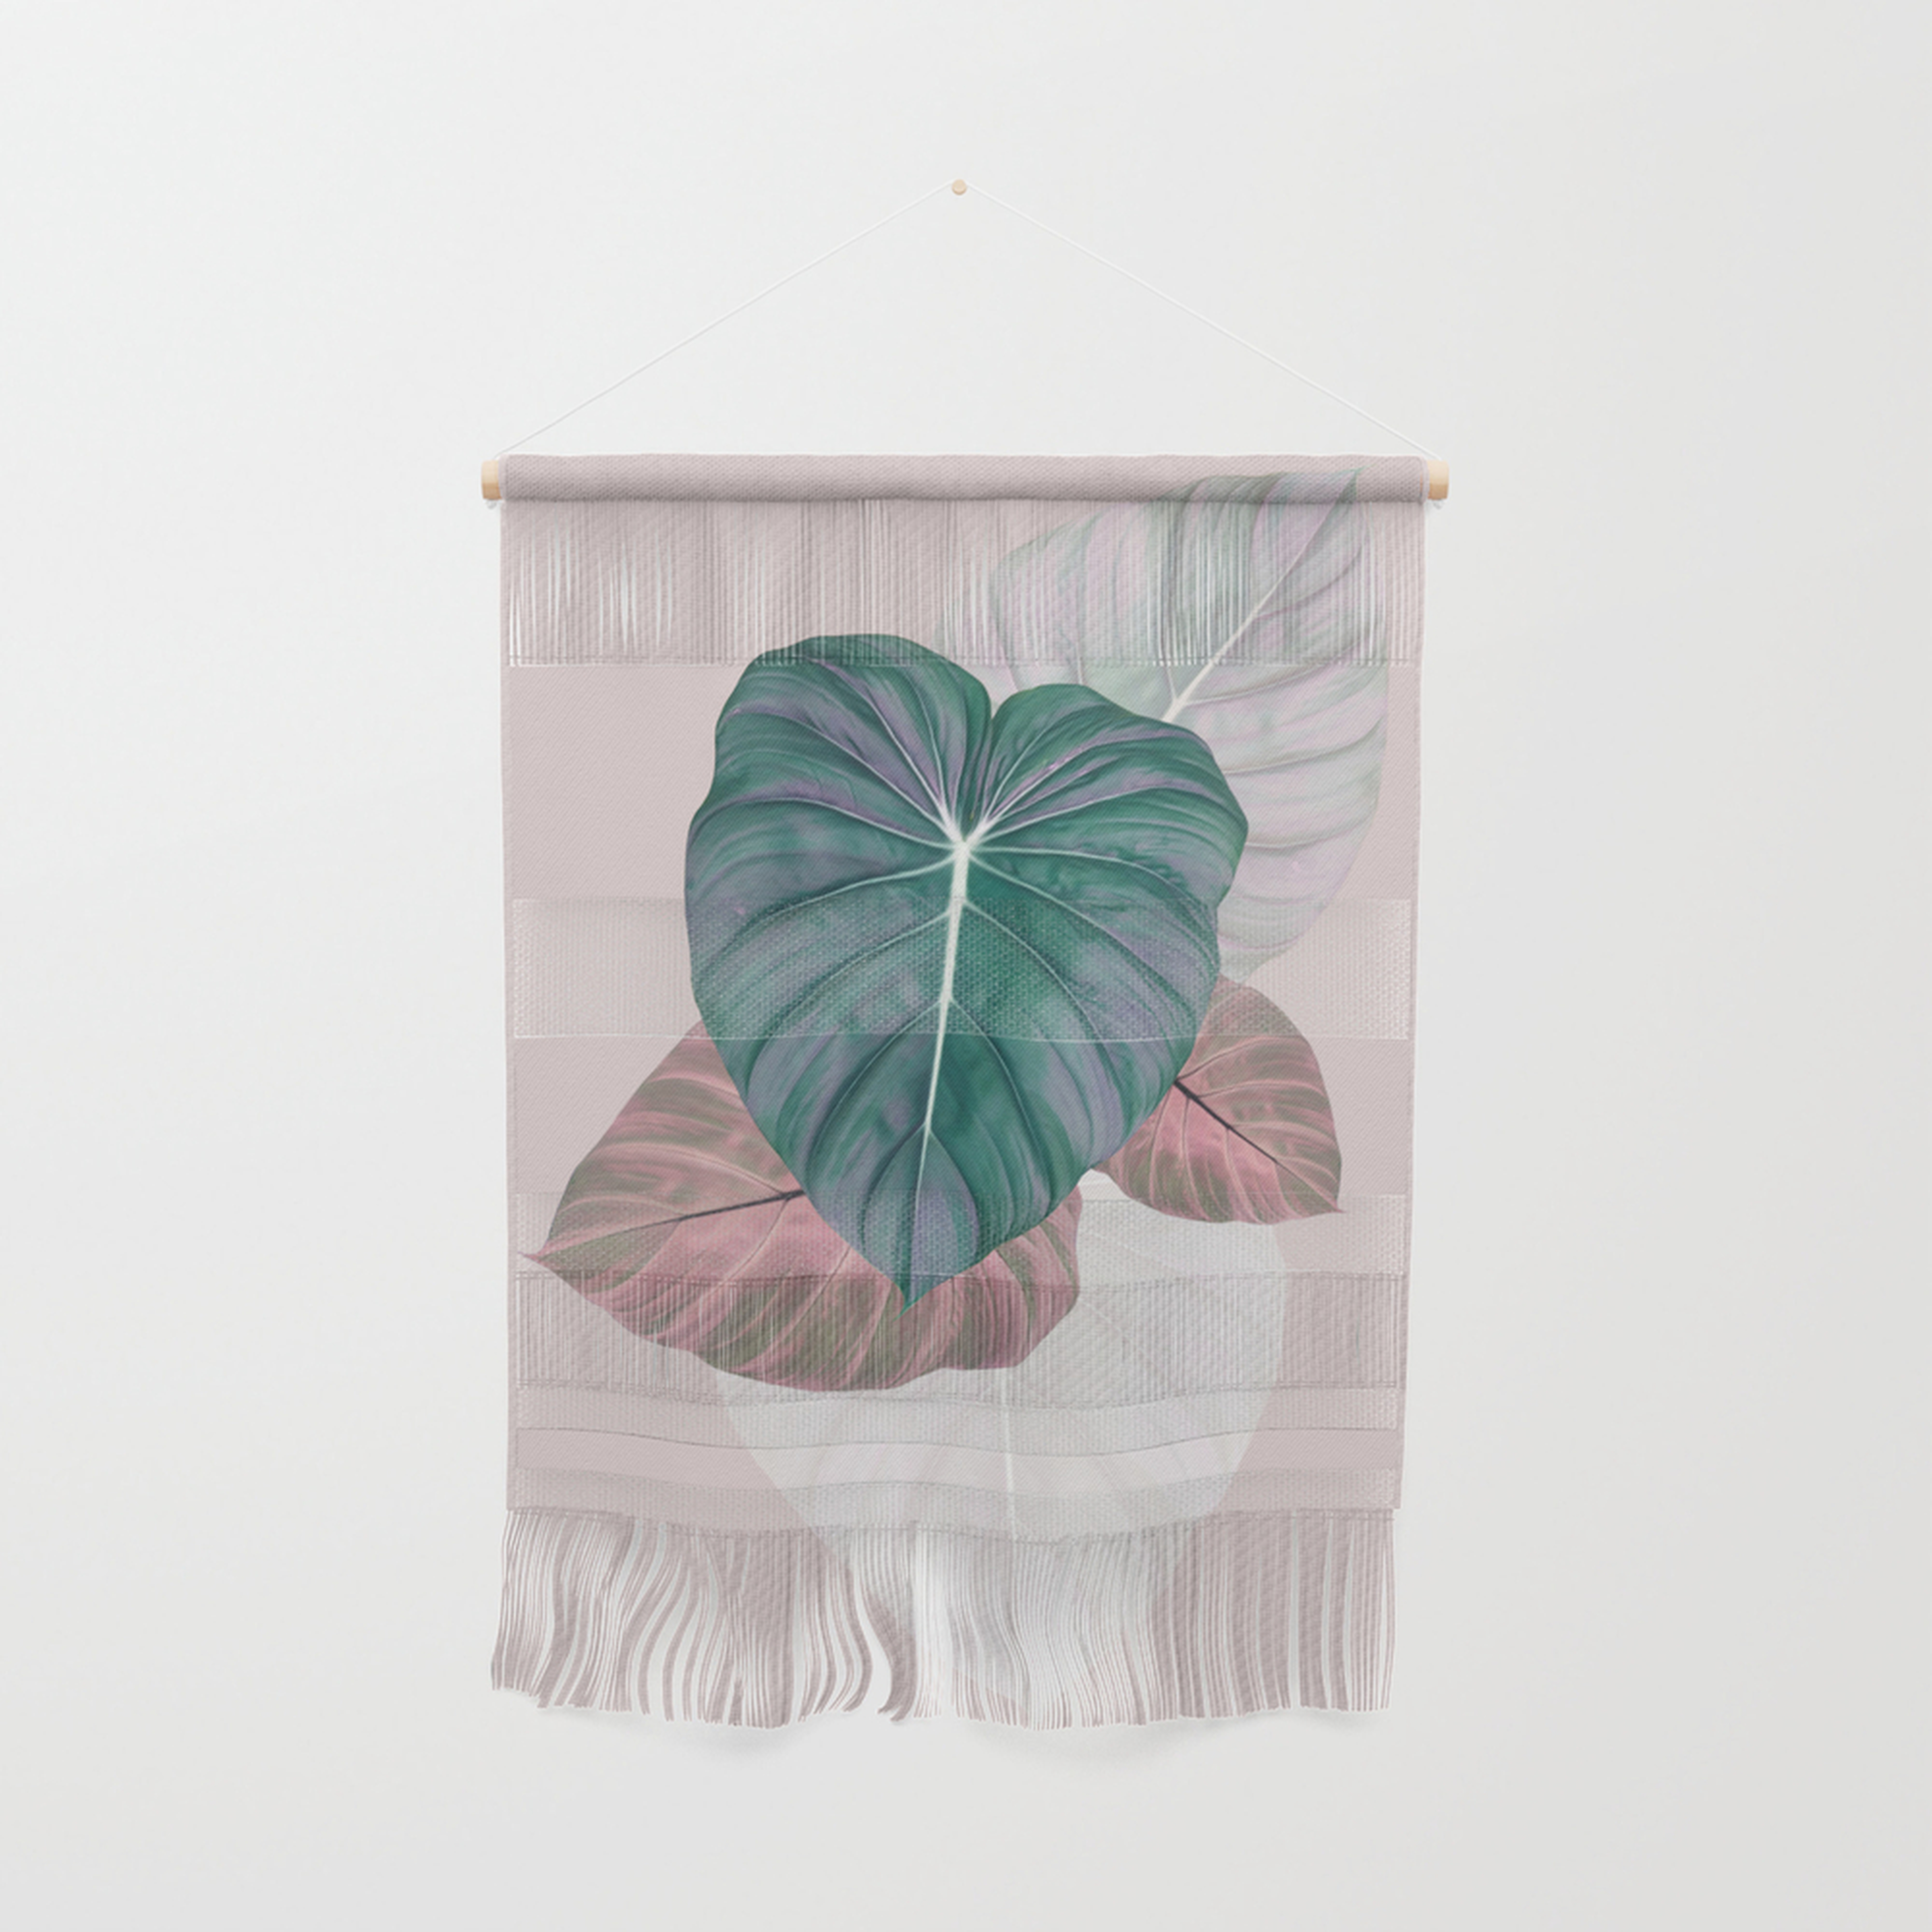 Pastel Leaves Wall Hanging by Printsproject - Large 23.25" x 31.5" - Society6